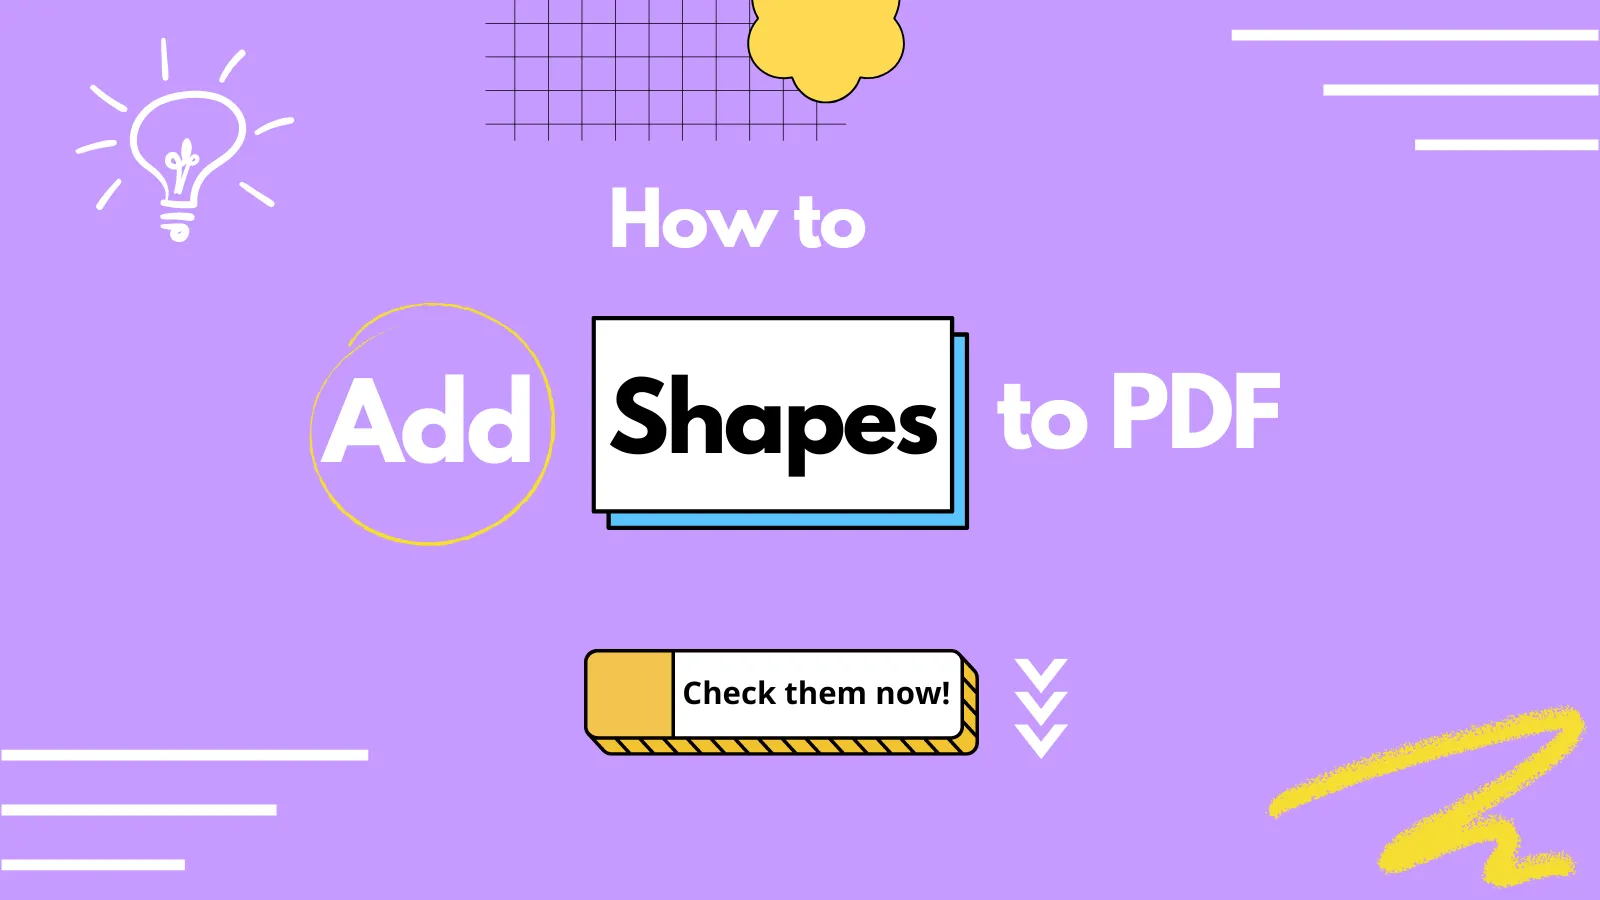 How to Add Shapes to PDF